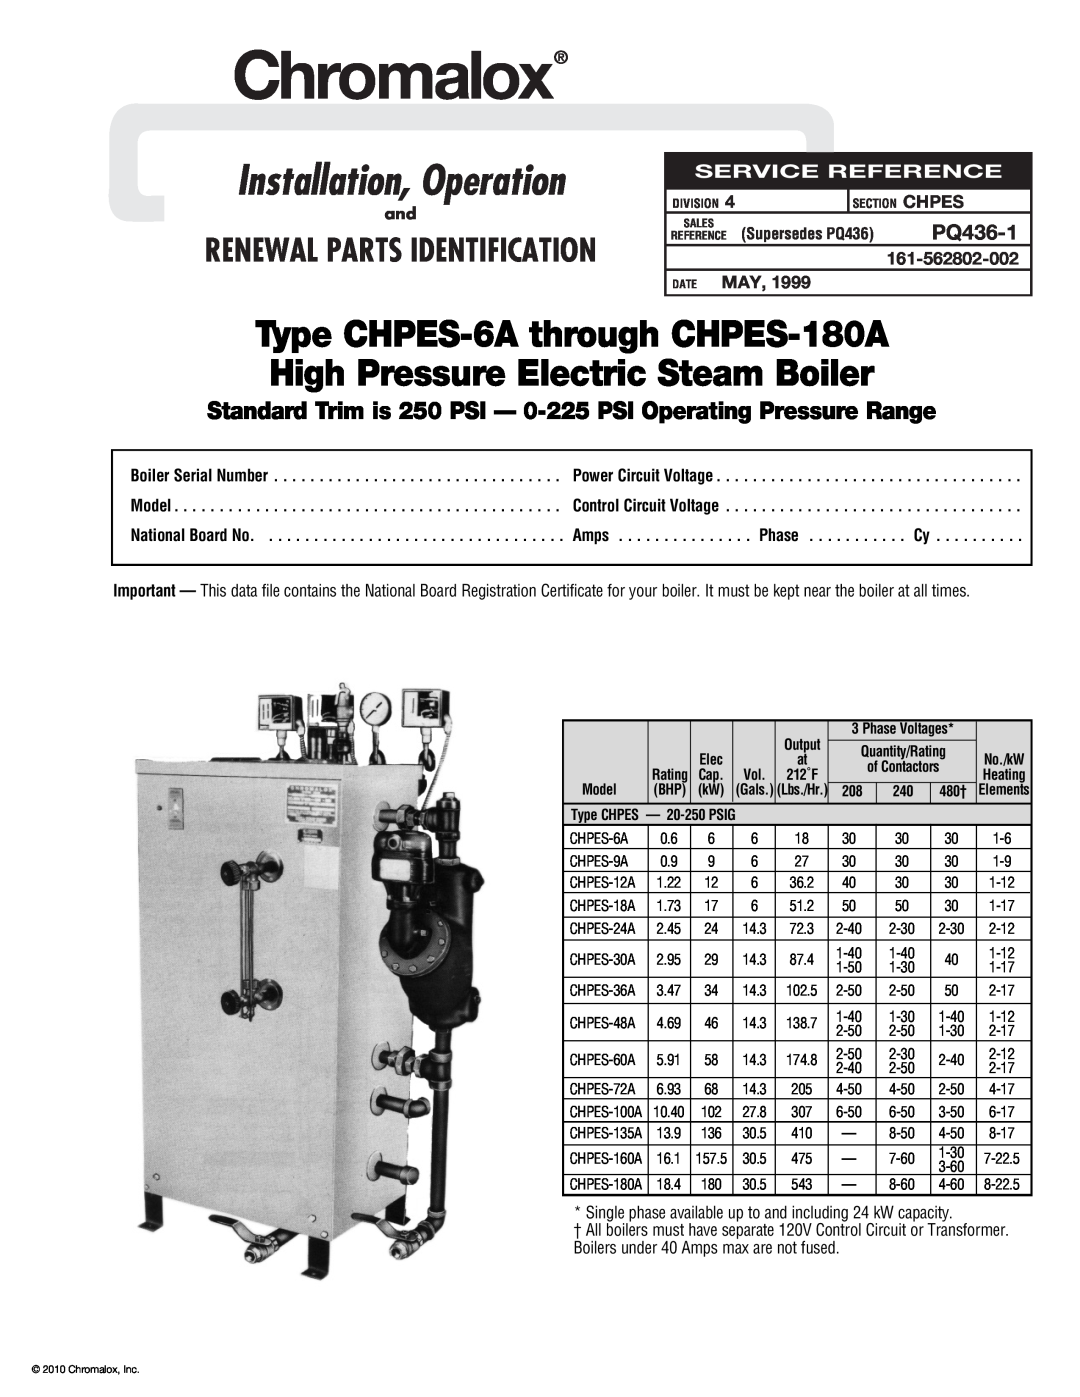 Chromalox CHPES-6A manual PQ436-1, Single phase available up to and including 24 kW capacity, Chromalox, Service Reference 